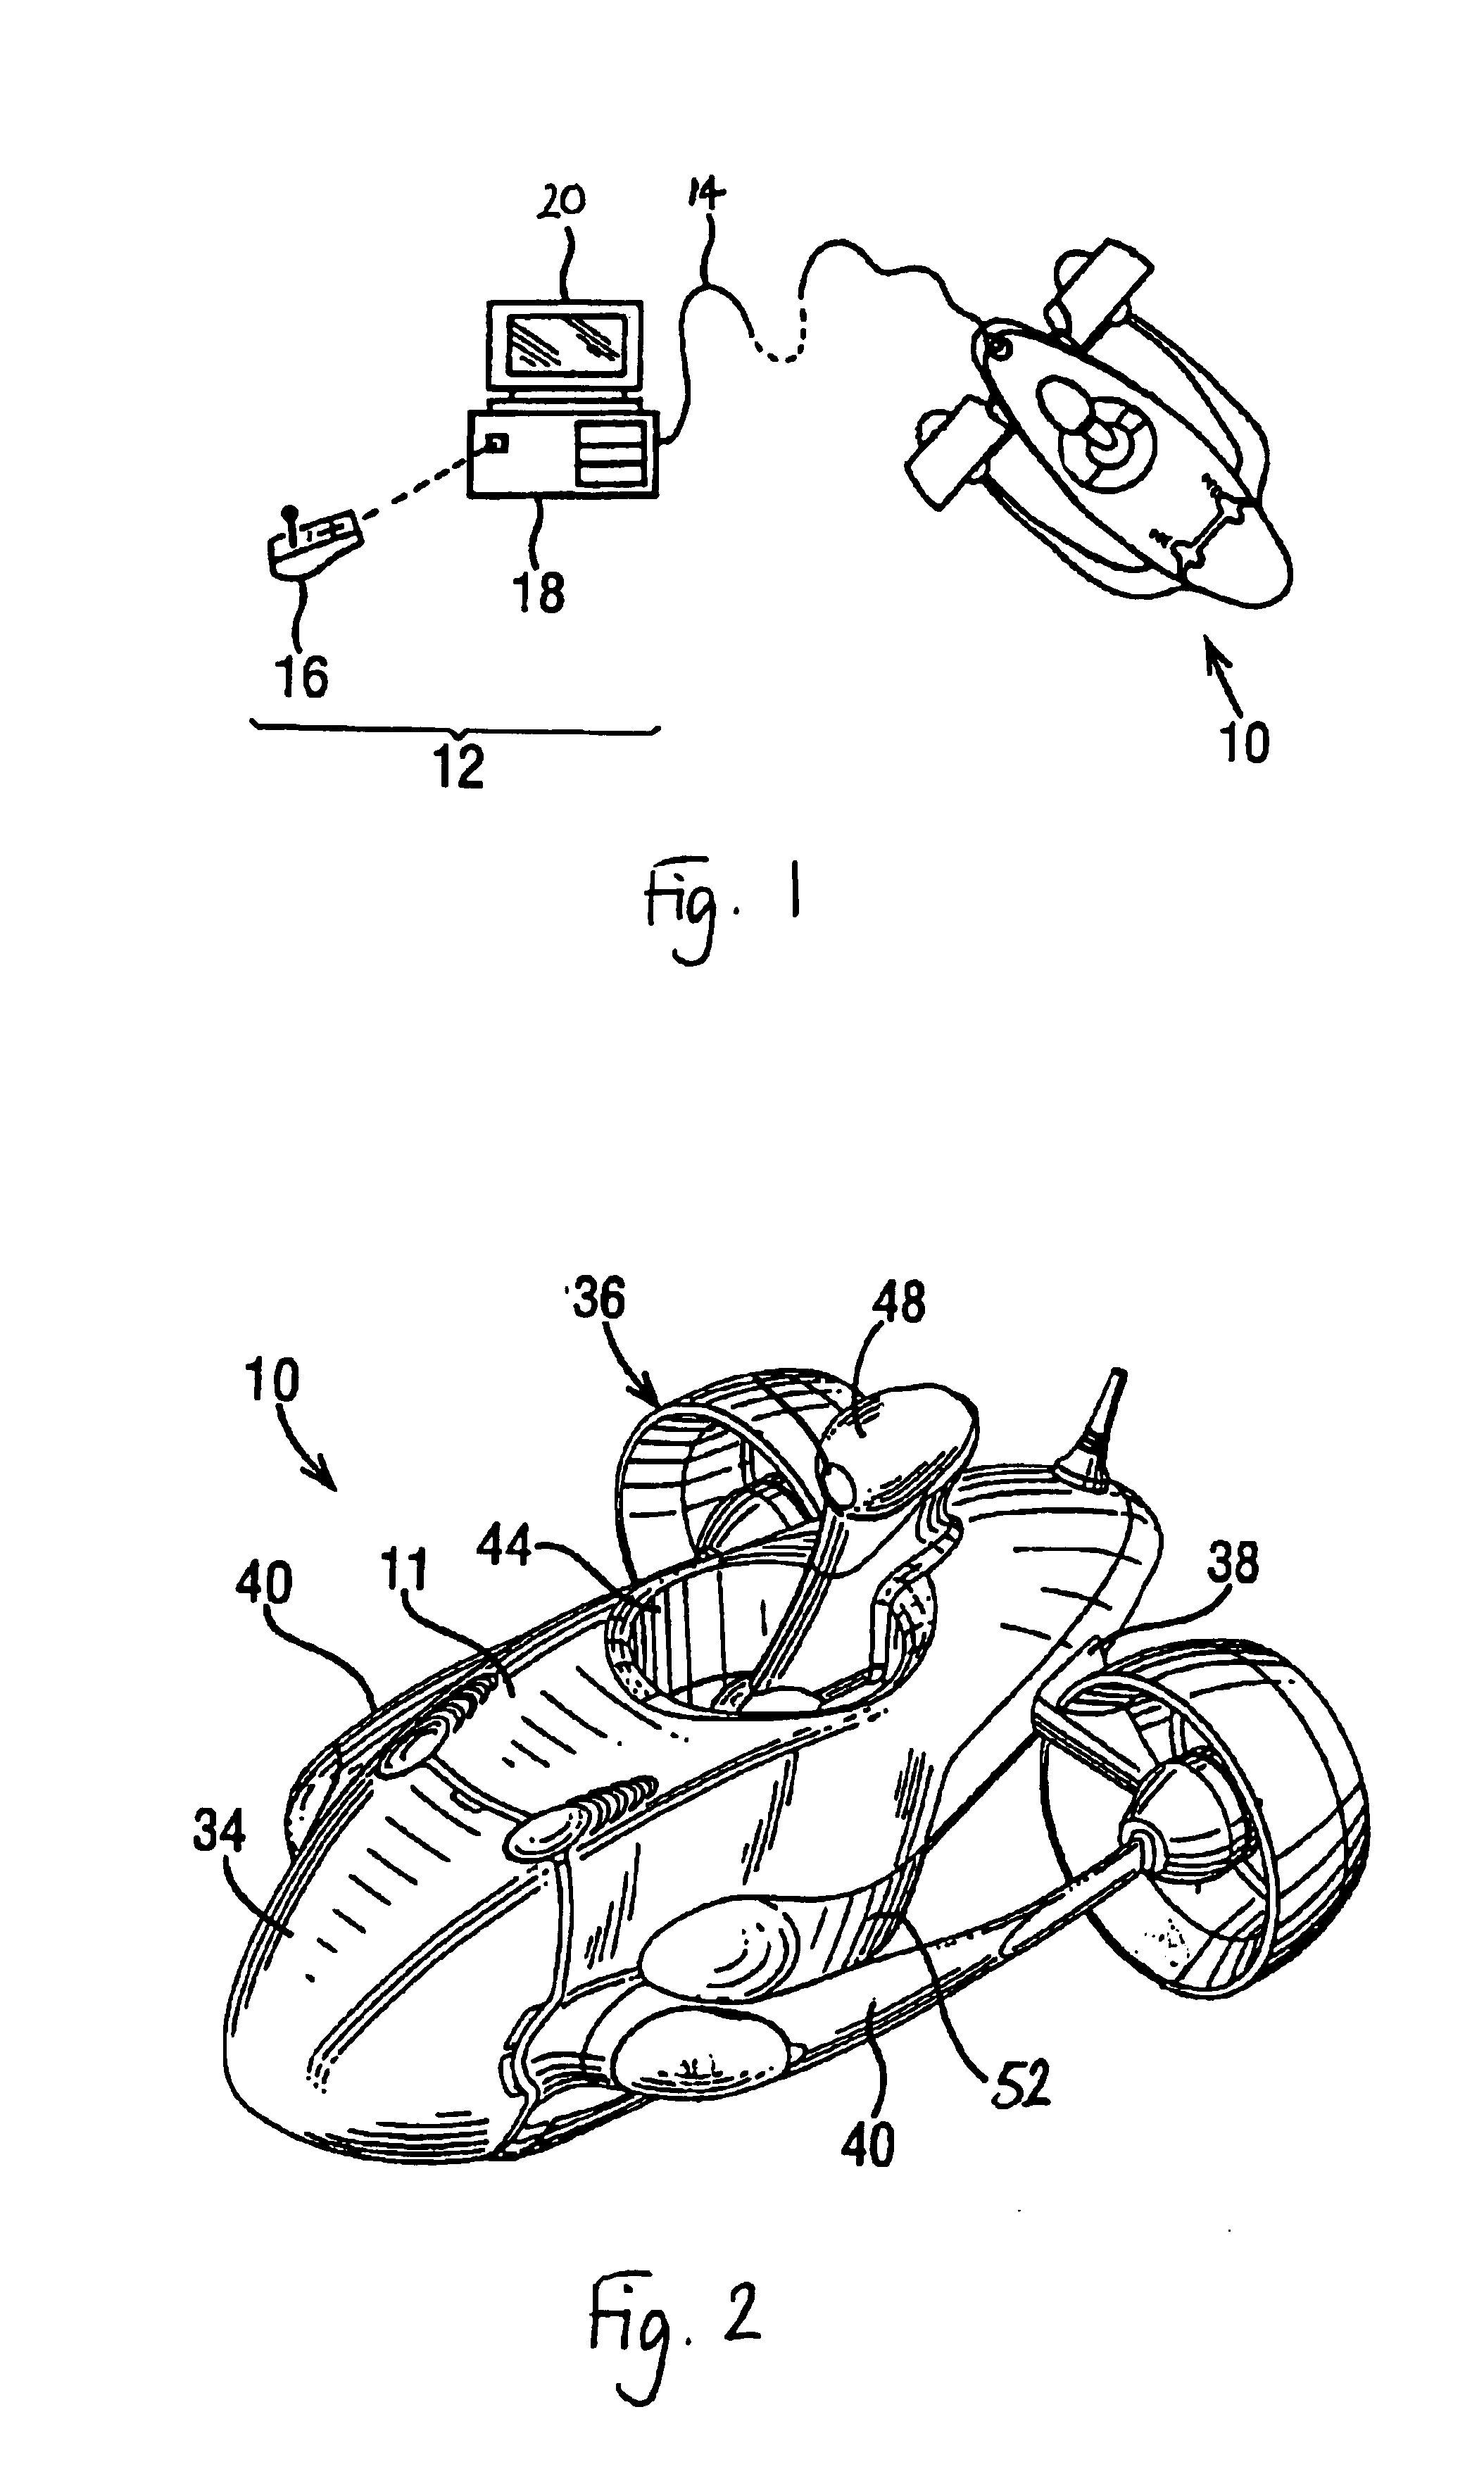 Location and movement of remote operated vehicles